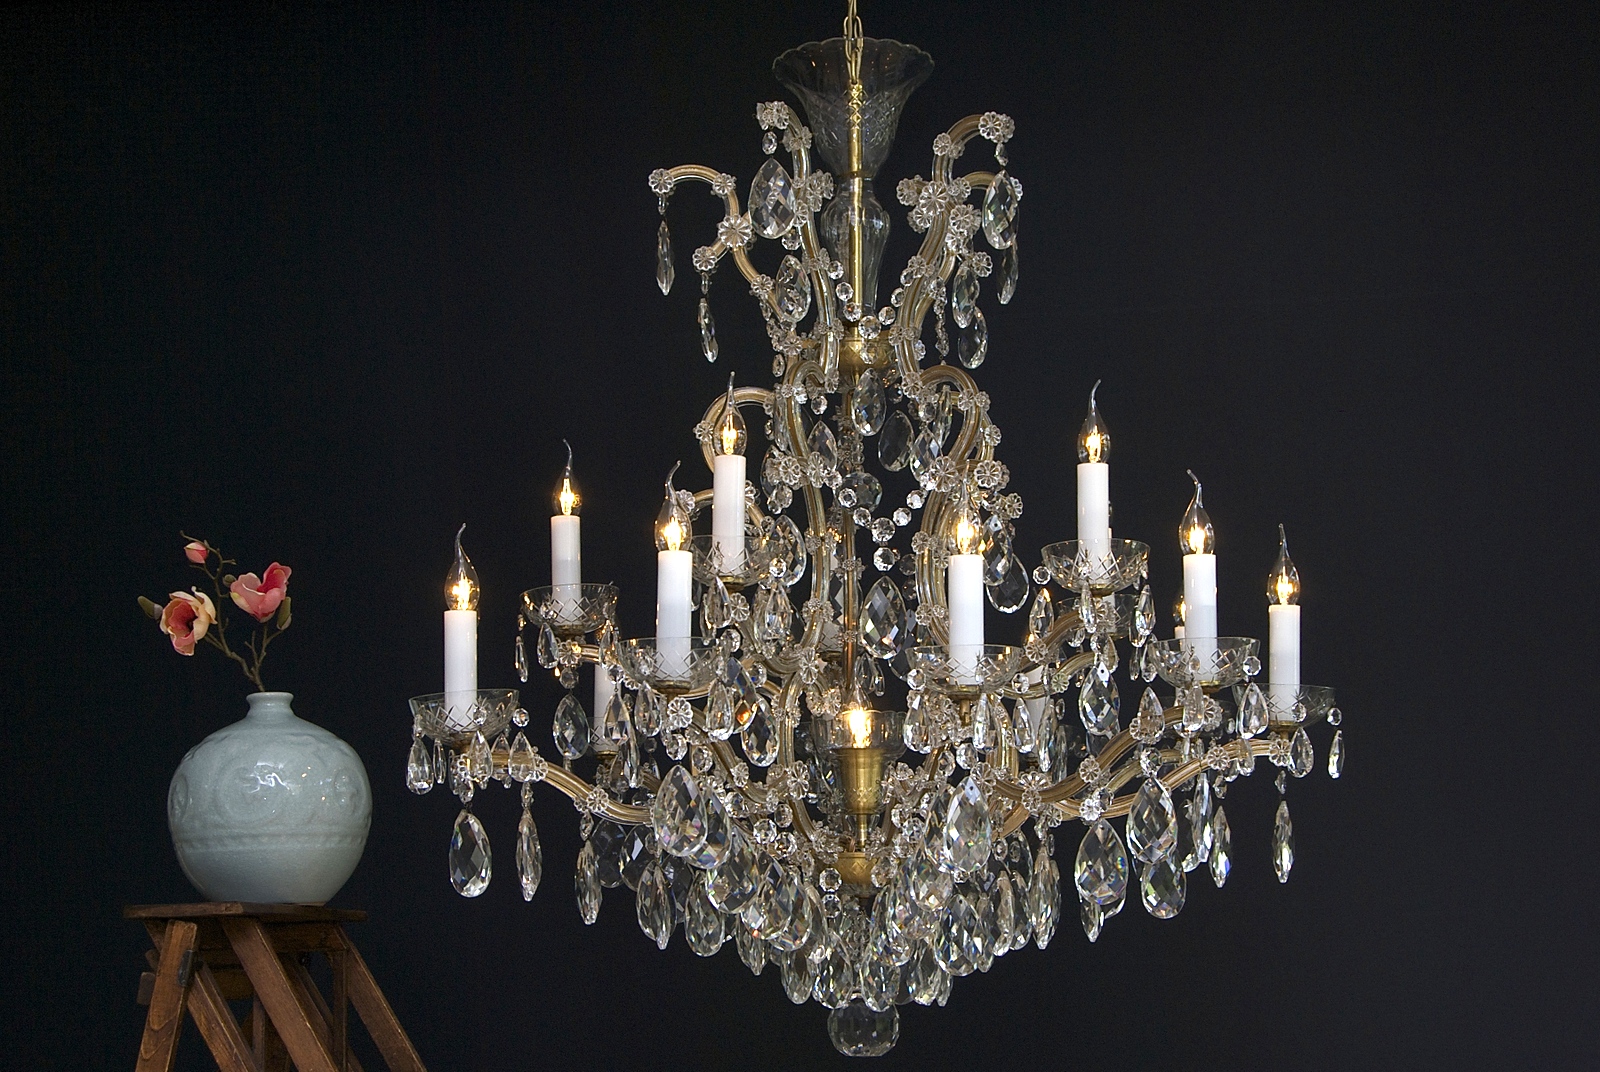 Large chandelier with Bohemian crystals and 16 light